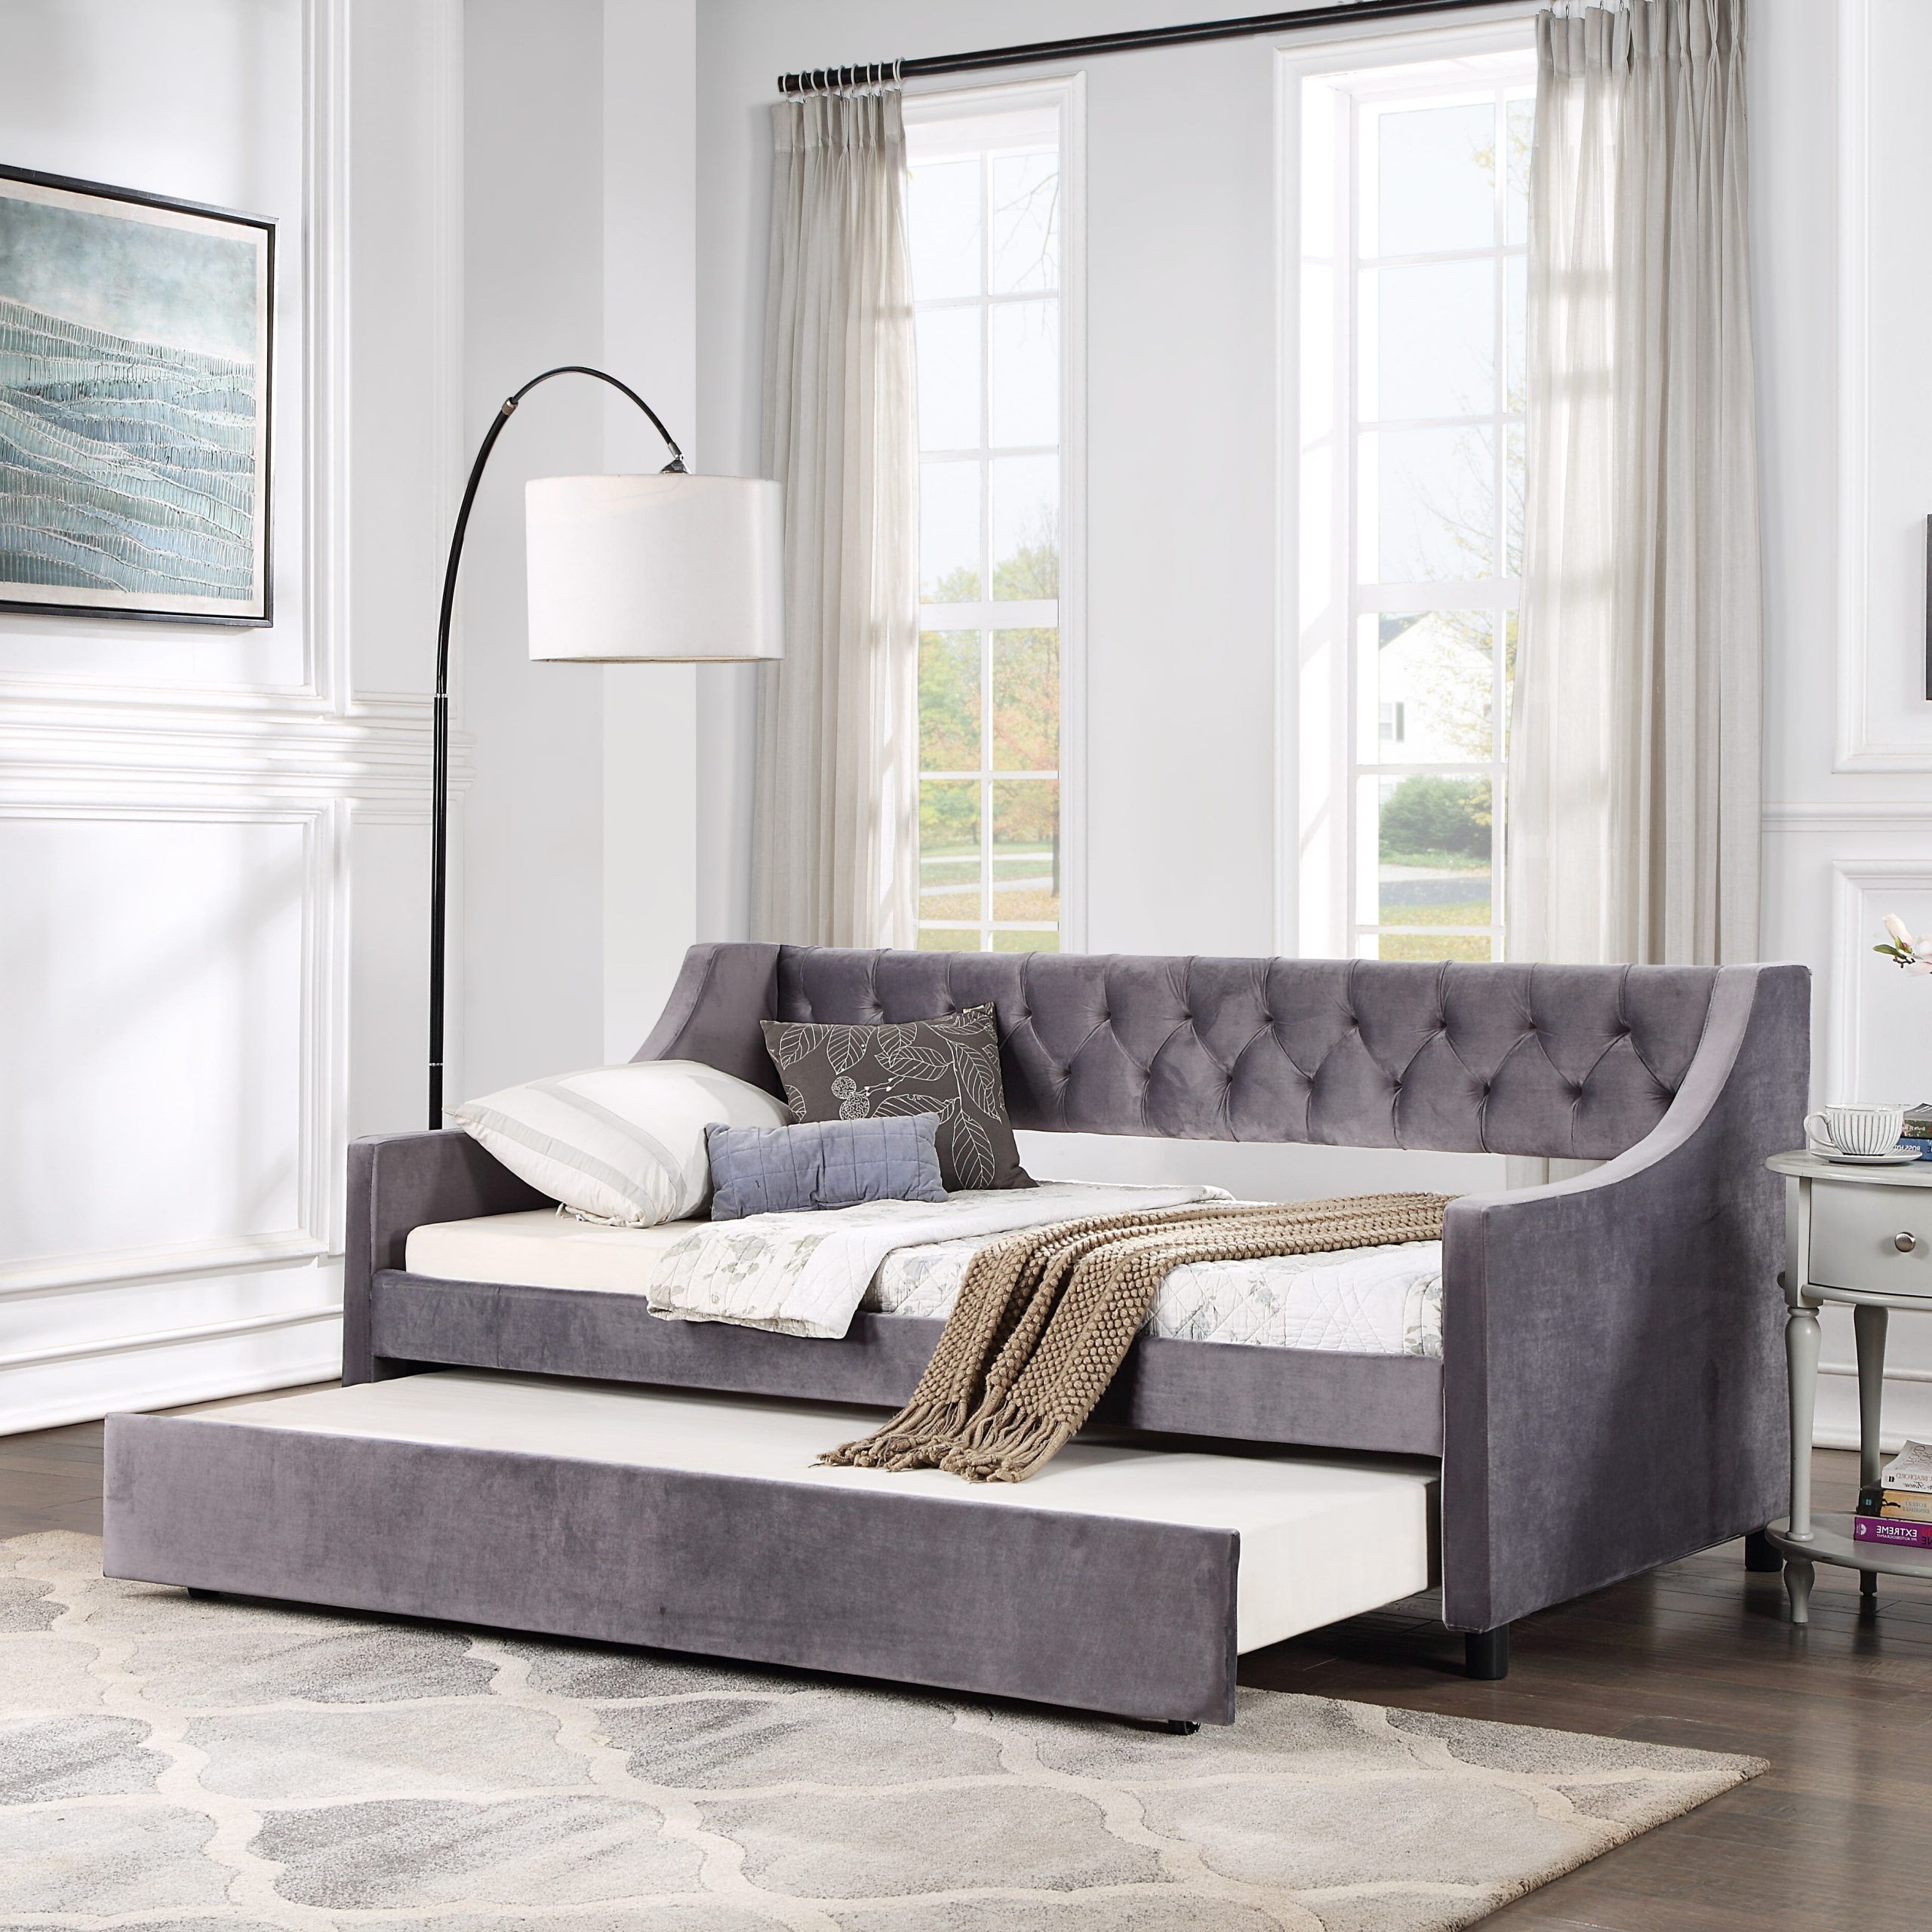 Overdrive Pull Out Sofa Bed With Upholstered Tufted Daybed Sleeper Sofa For 2 In 1 Gray Pull Out Sofa Beds (Gallery 3 of 20)